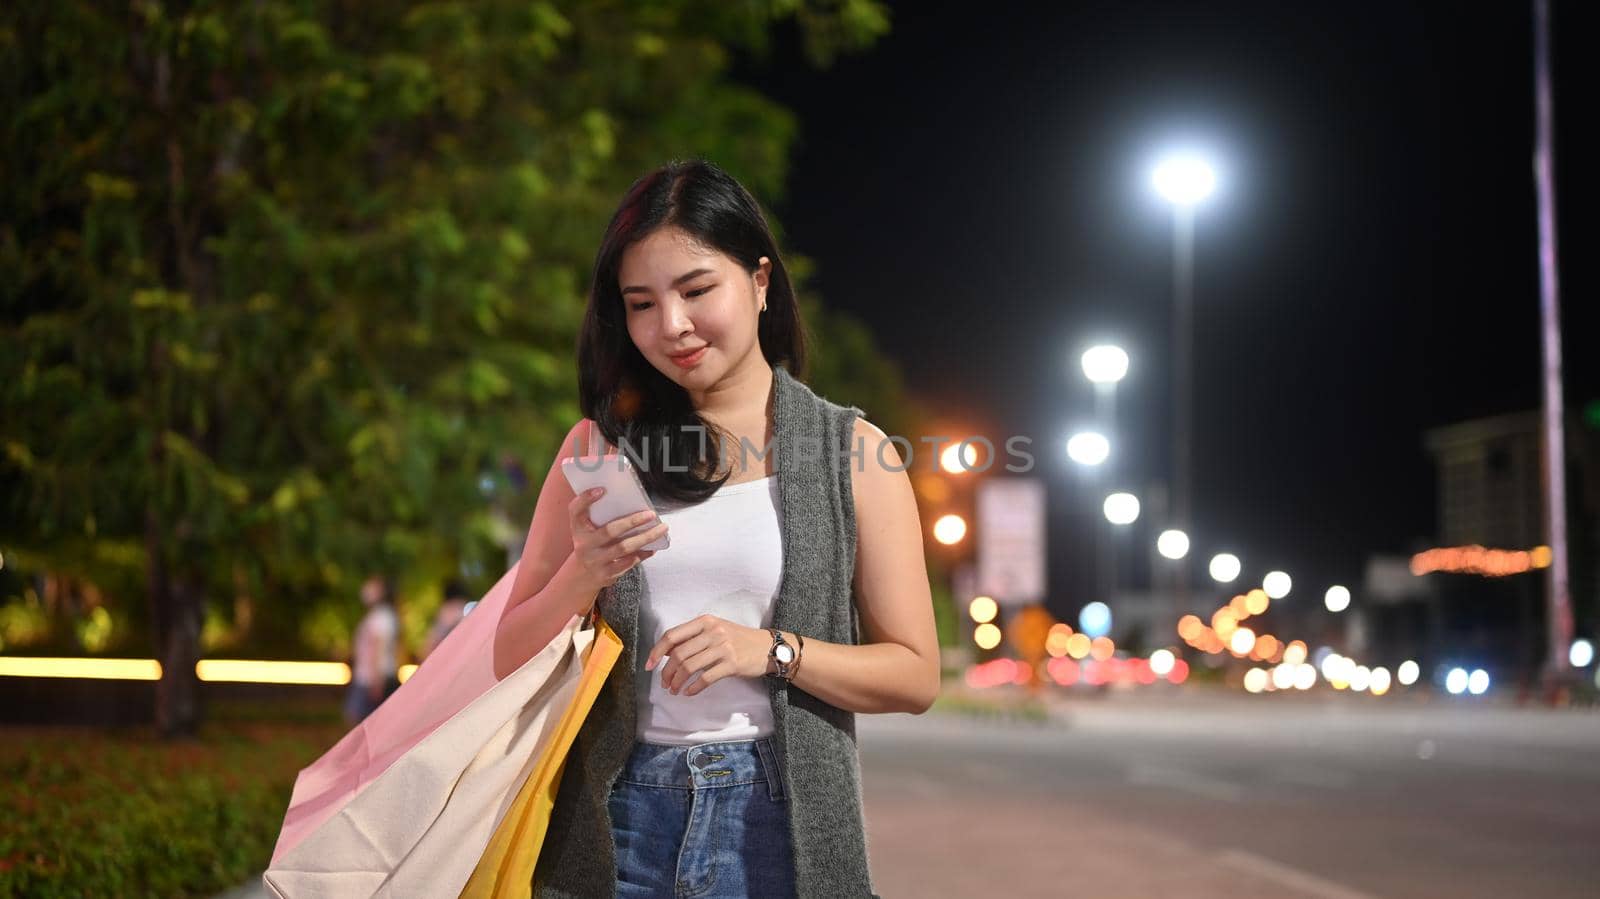 Stylish woman typing text message on her mobile phone while walking through night city street with blurred lights background.